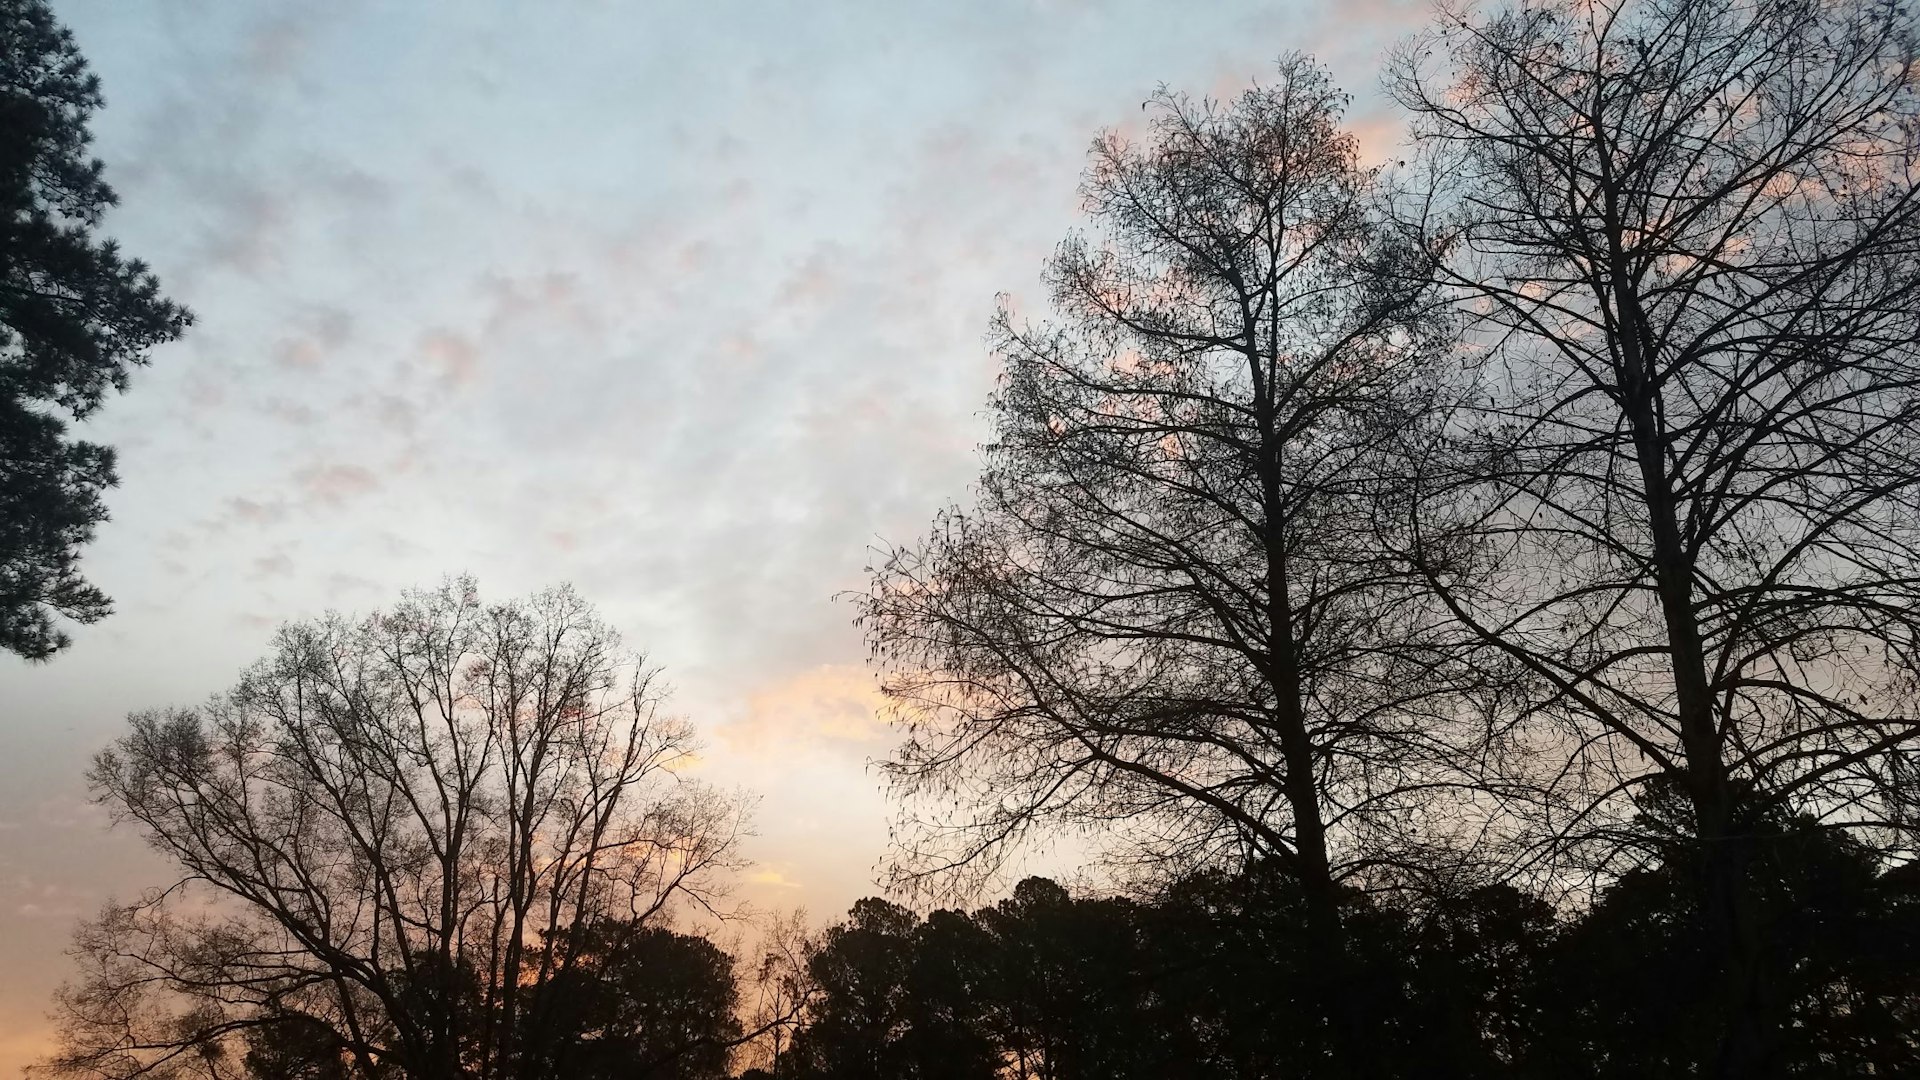 The sunset sinks over trees in Milledgeville, Georgia